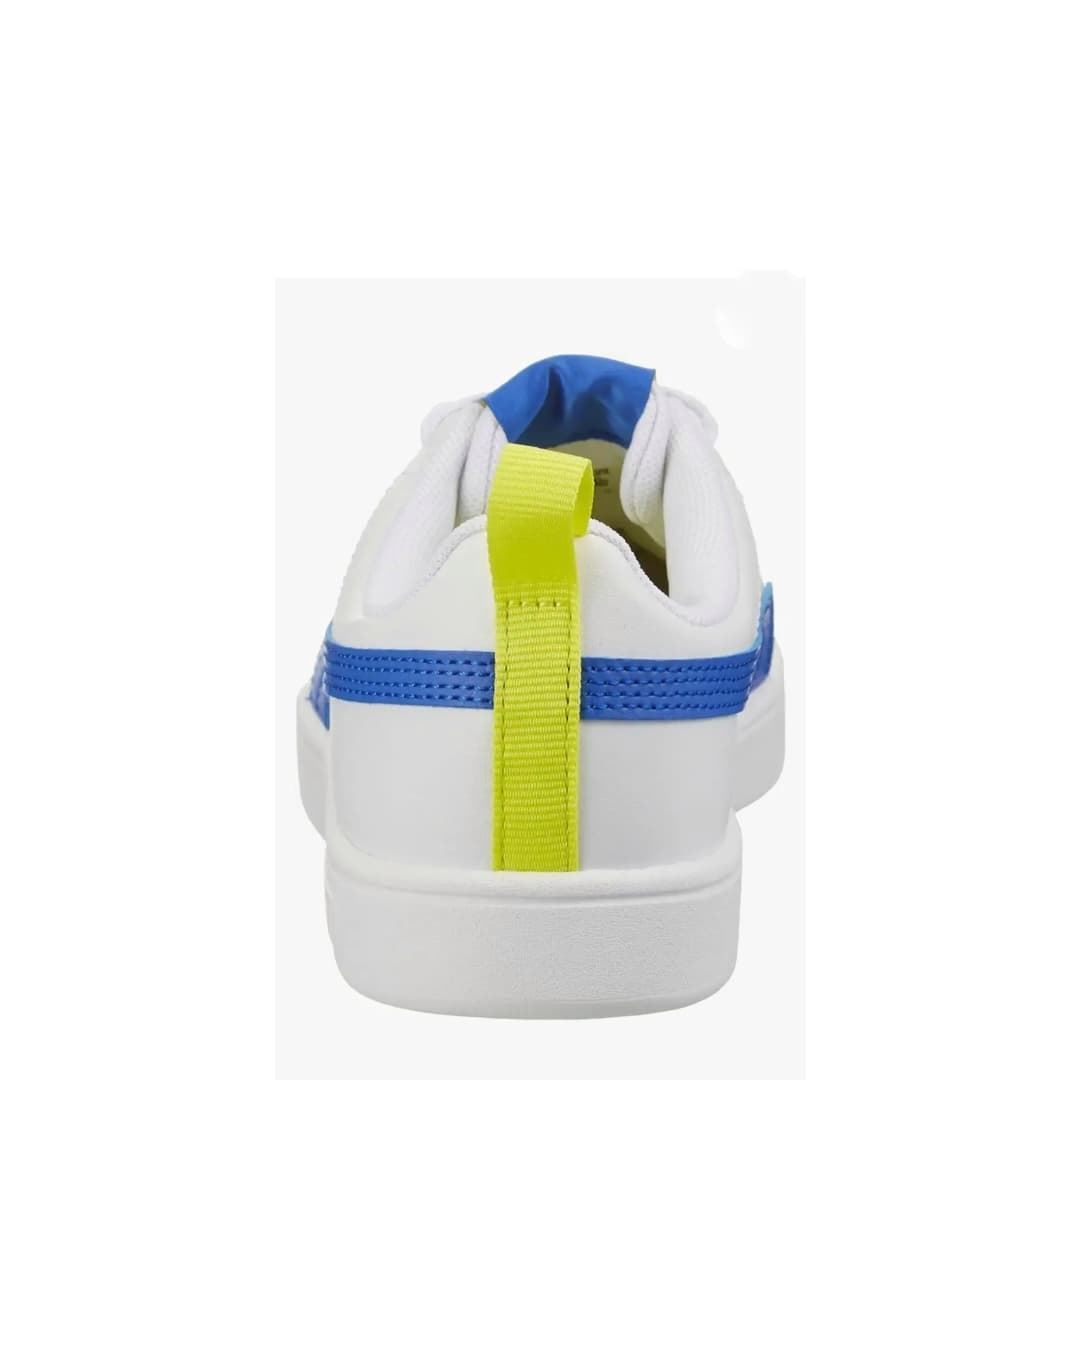 Puma Rickie Jr Sneakers White Blue with lace - Image 3